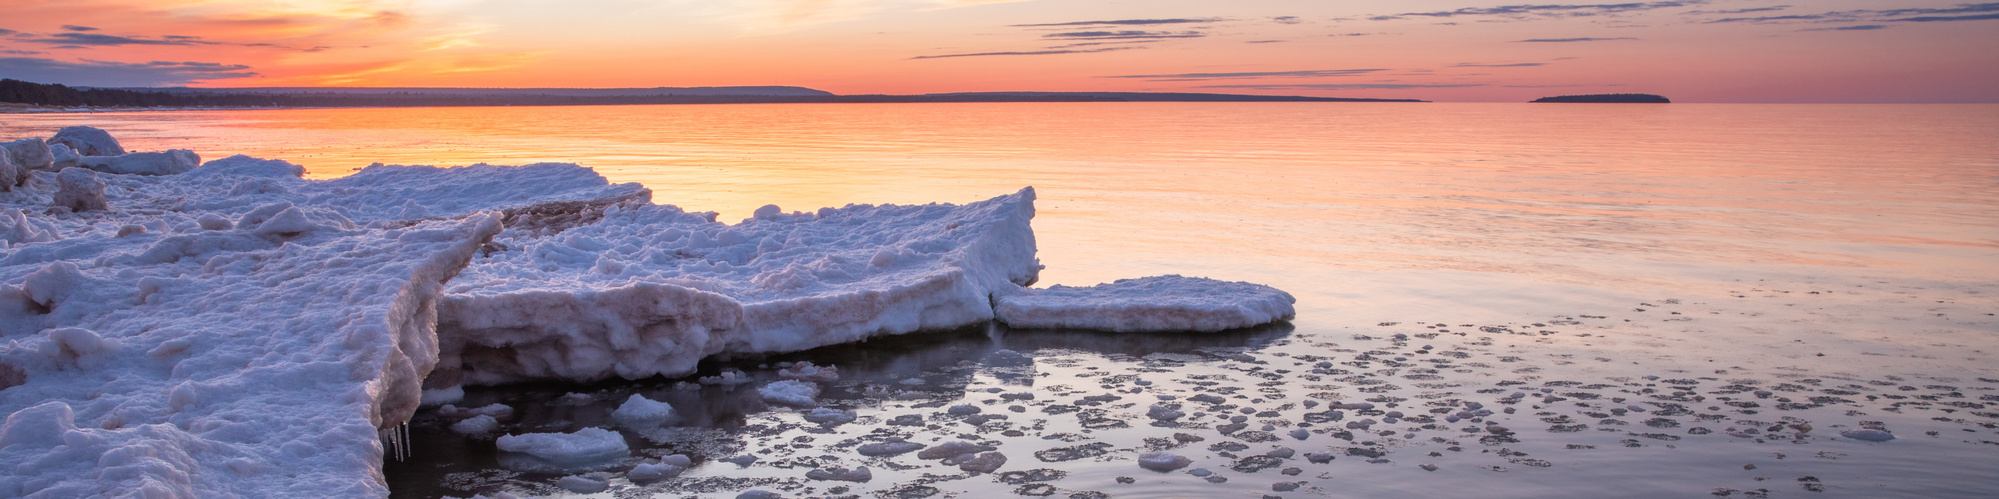 Colorful winter sunset over Lake Superior with ice shelf along the shoreline in the Upper Peninsula of Michigan